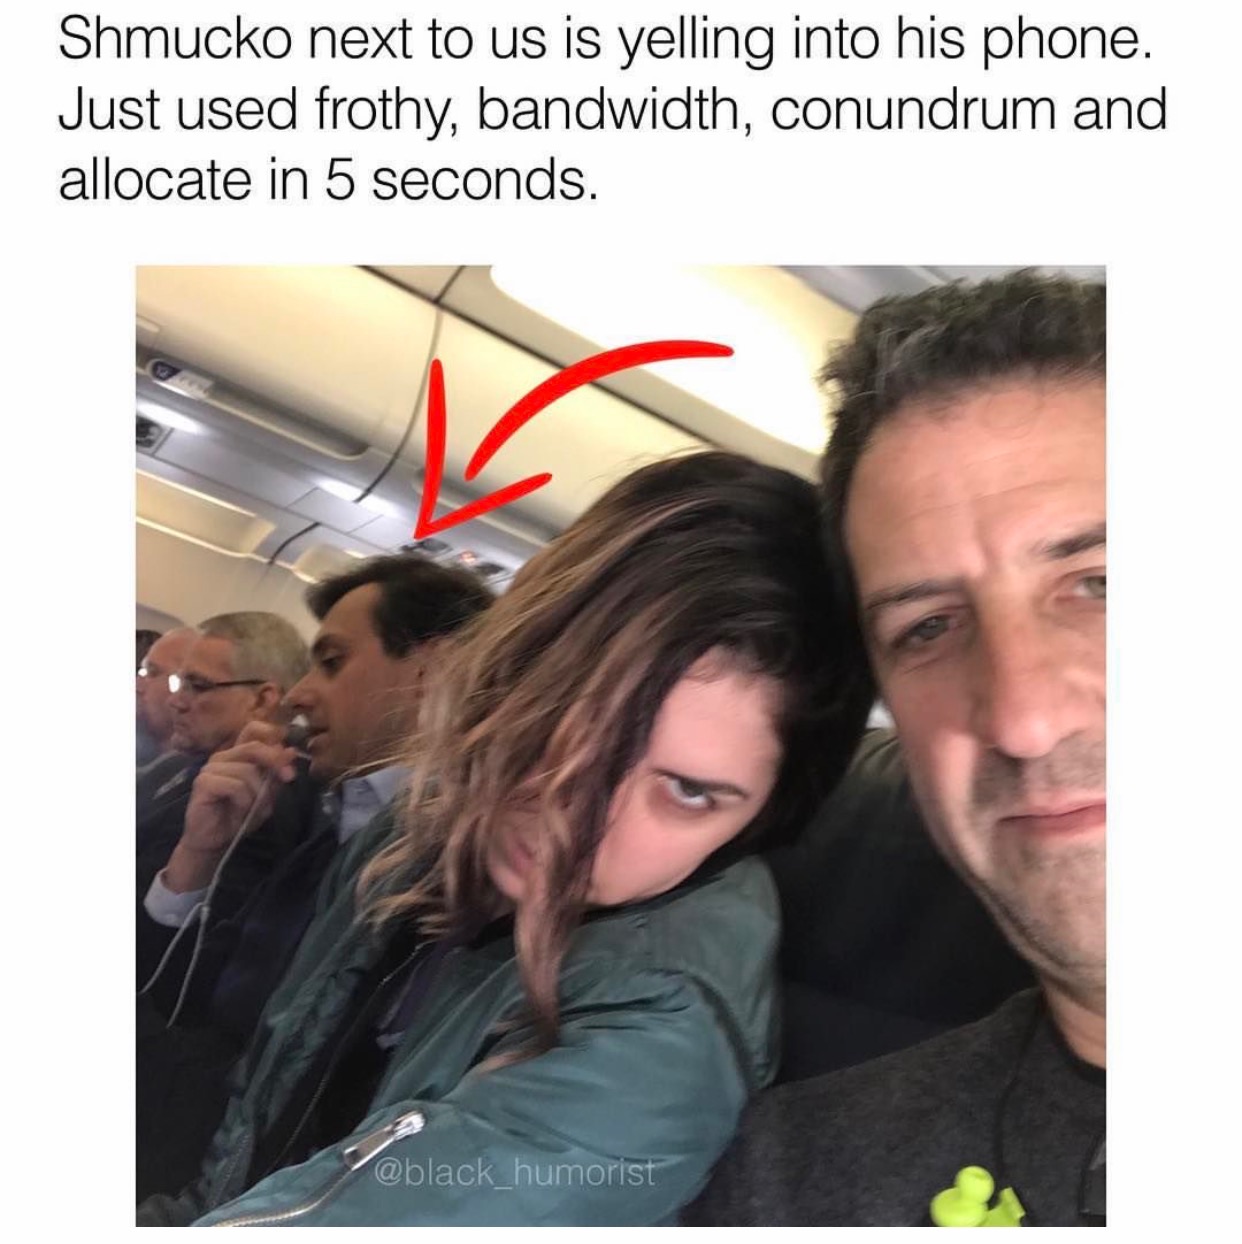 dankest of memes - Shmucko next to us is yelling into his phone. Just used frothy, bandwidth, conundrum and allocate in 5 seconds.